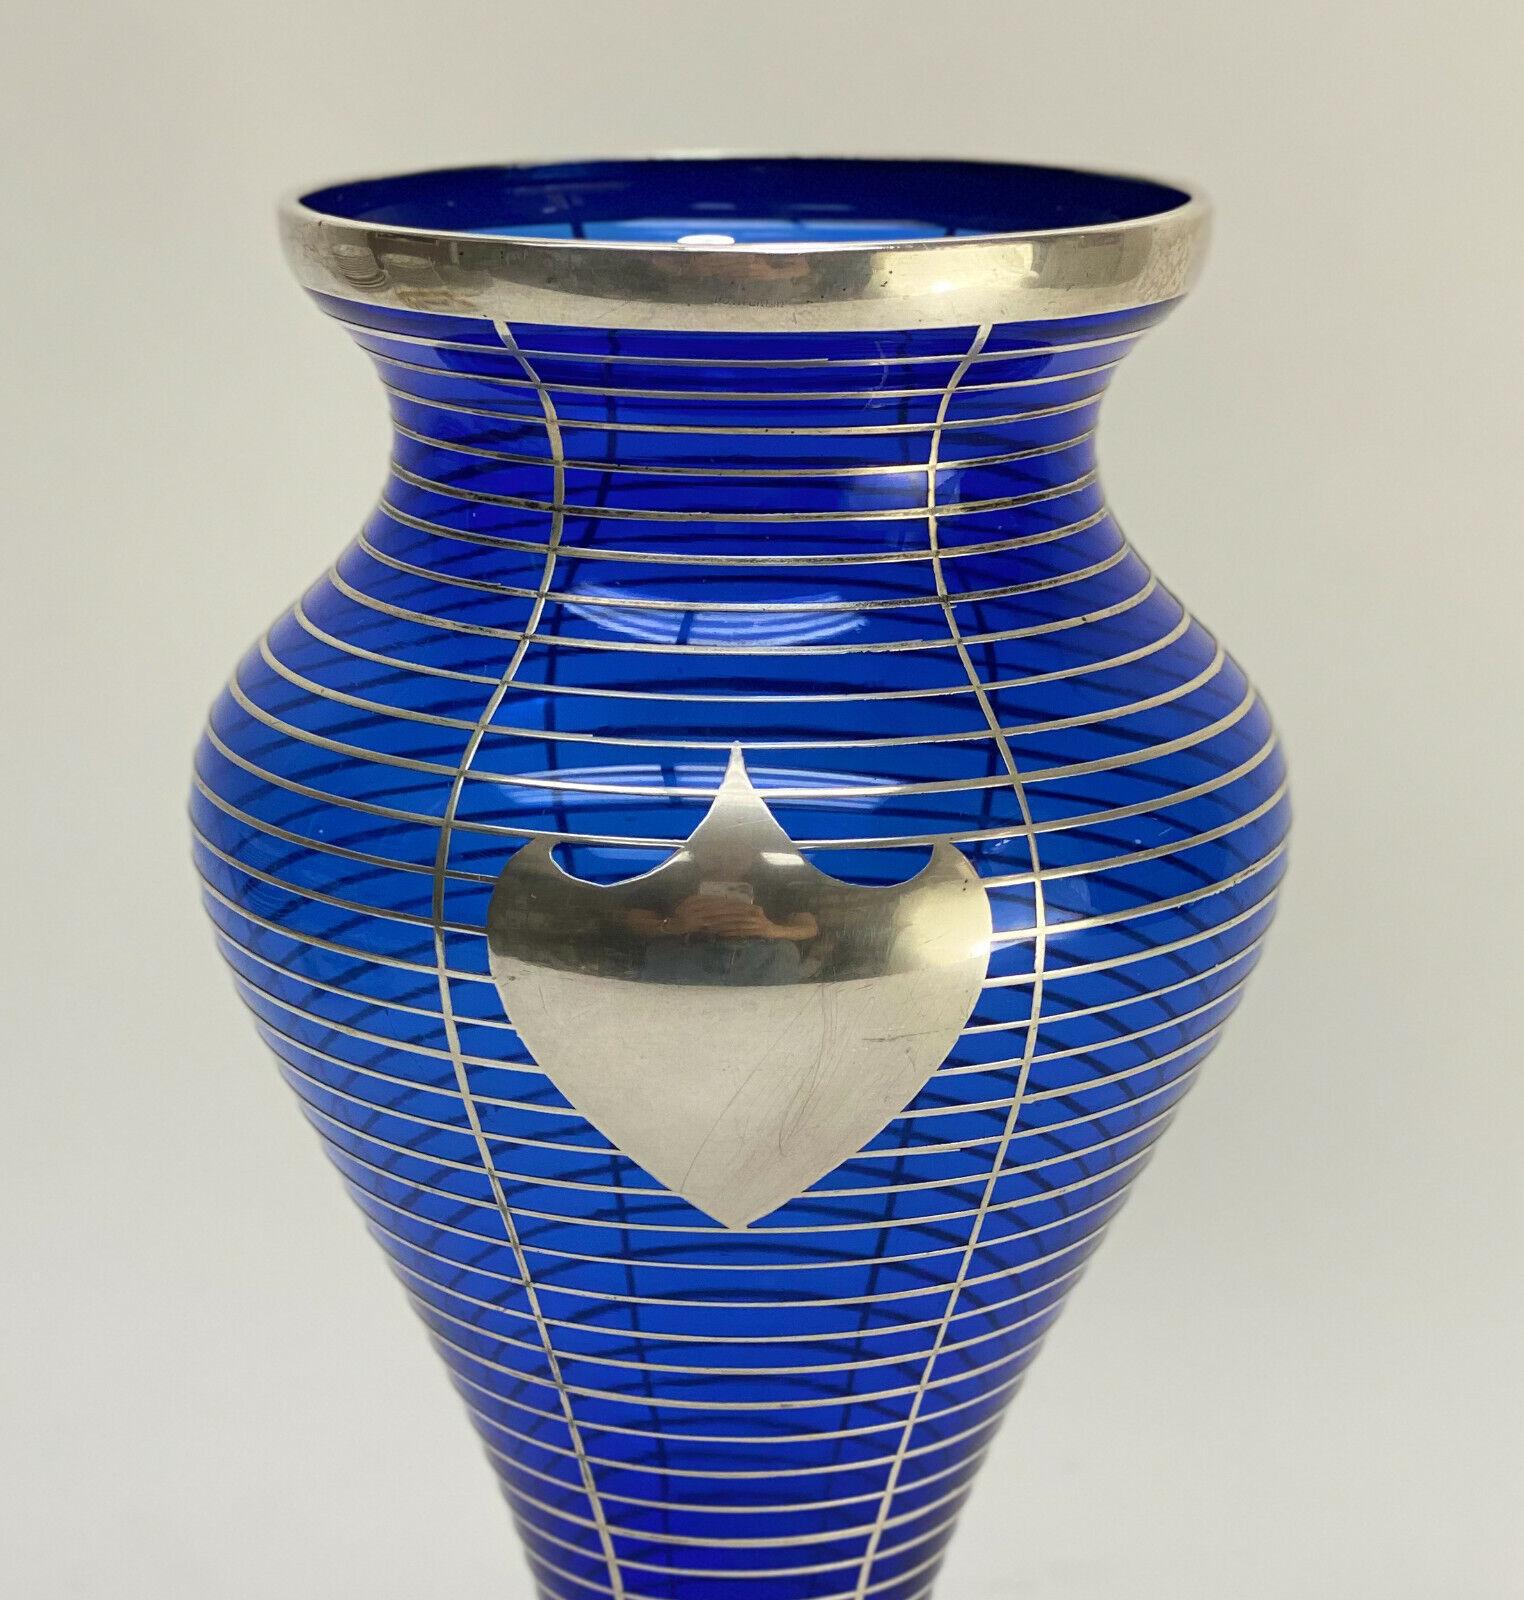 American La Pierre silver overlay cobalt blue glass vase, circa 1910

Vertical and horizontal silver stripes with an open monogrammed armorial crest to the center. La Pierre sterling silver mark to the base.

Additional information:
Time Period